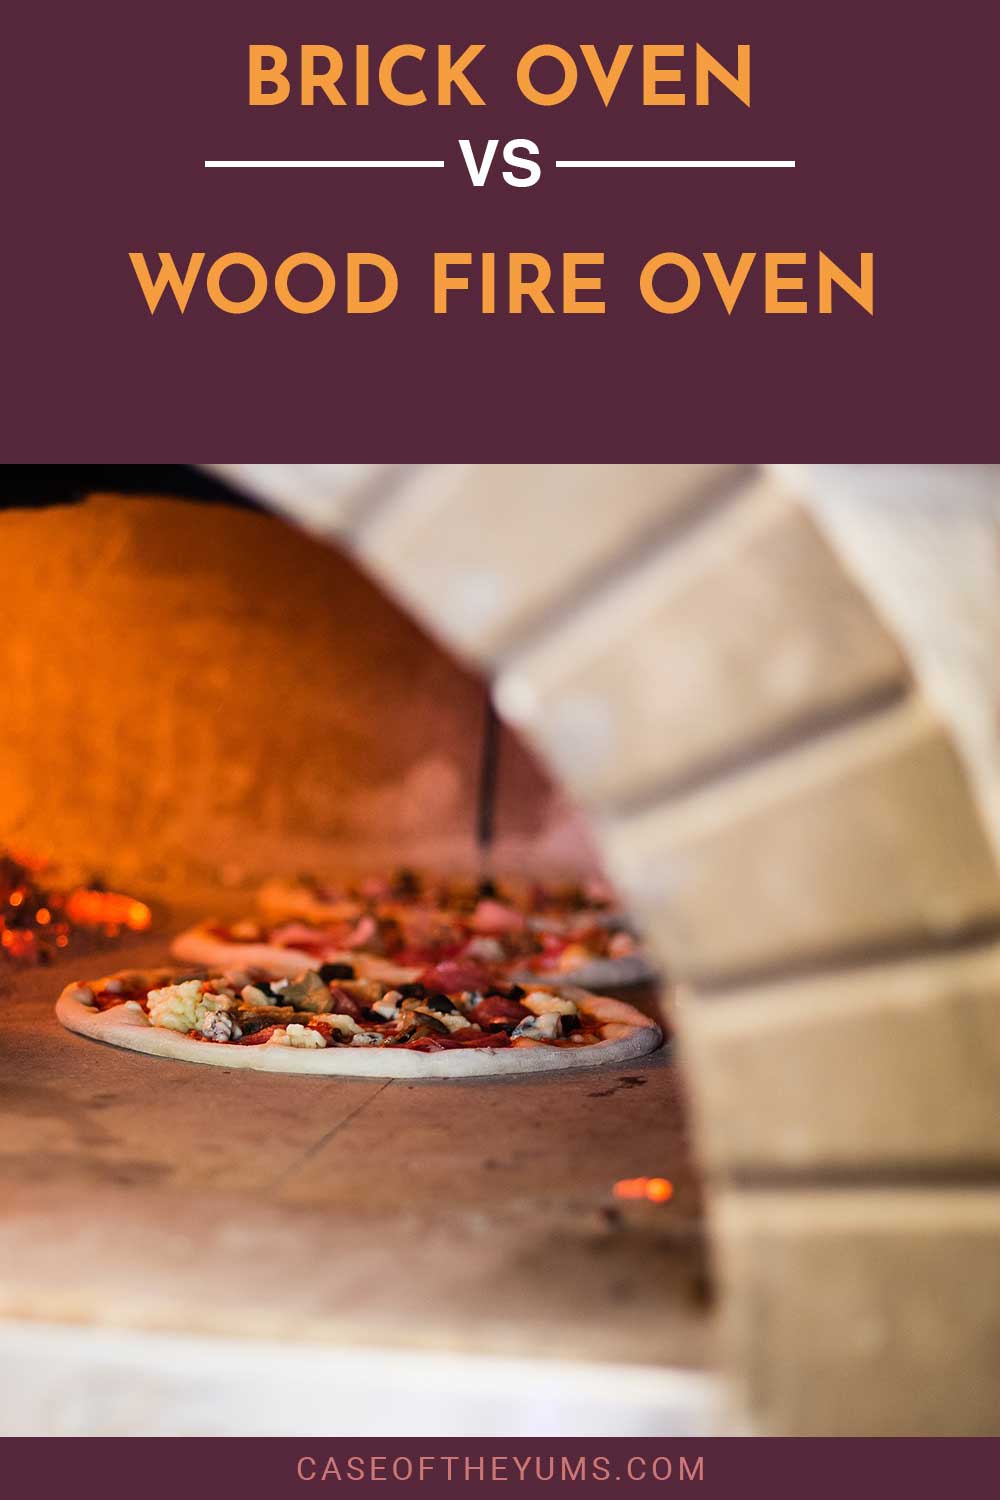 Pizzas in an oven - Brick Oven vs. Wood Fire Oven.